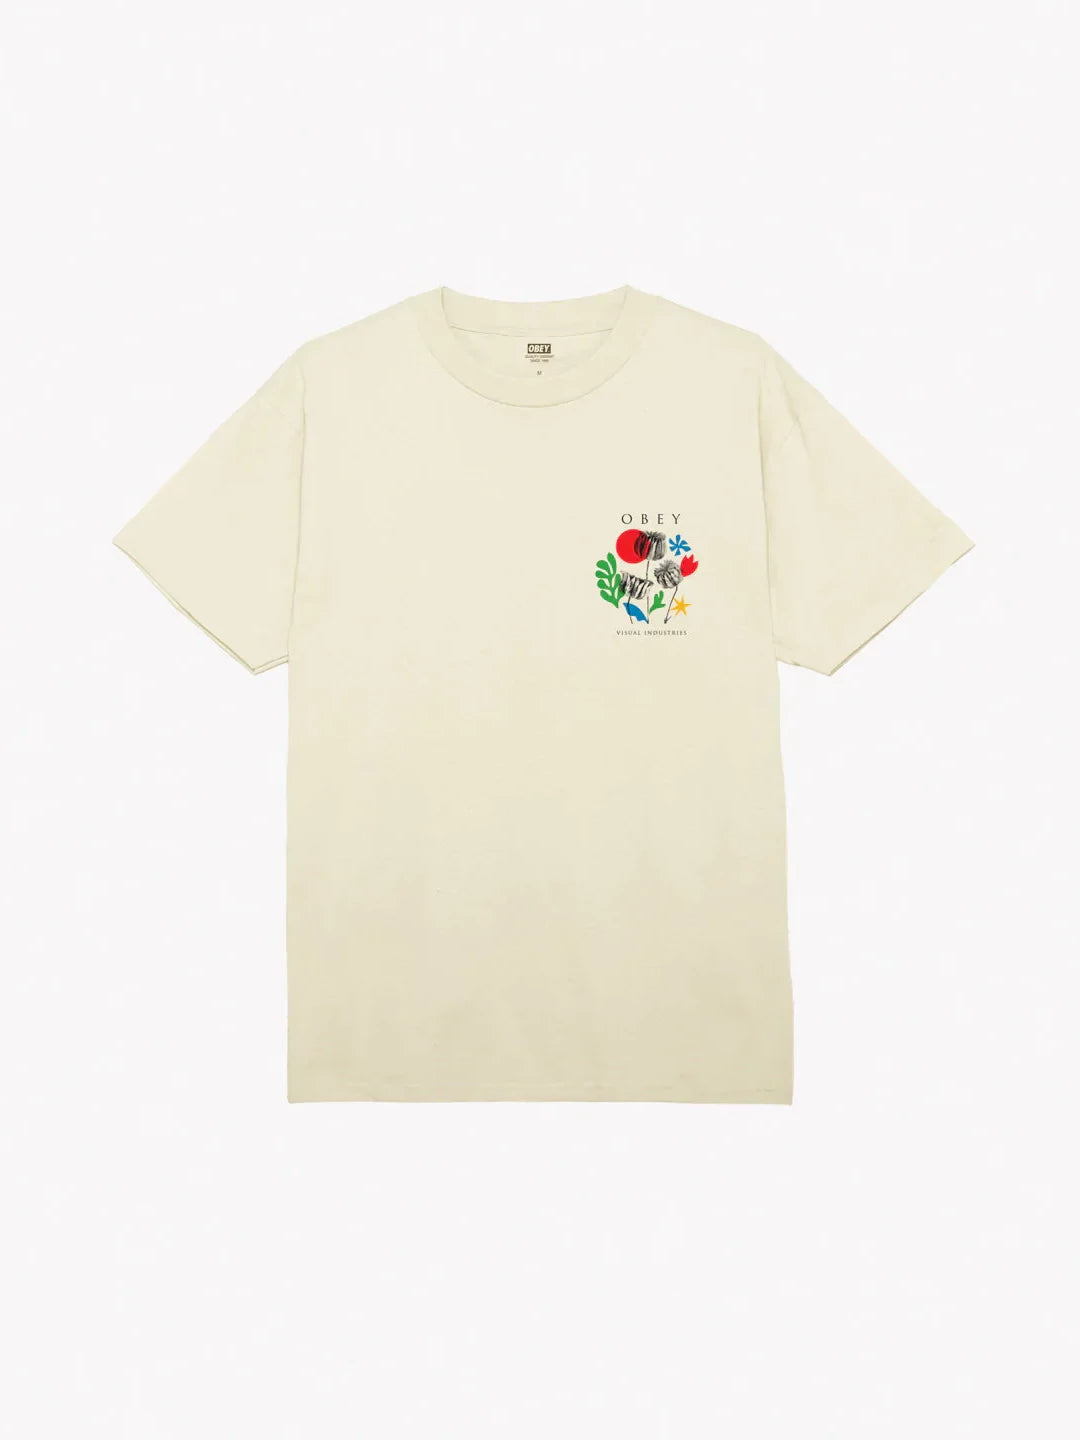 OBEY FLOWERS PAPERS SCISSORS T-SHIRT CREAM 